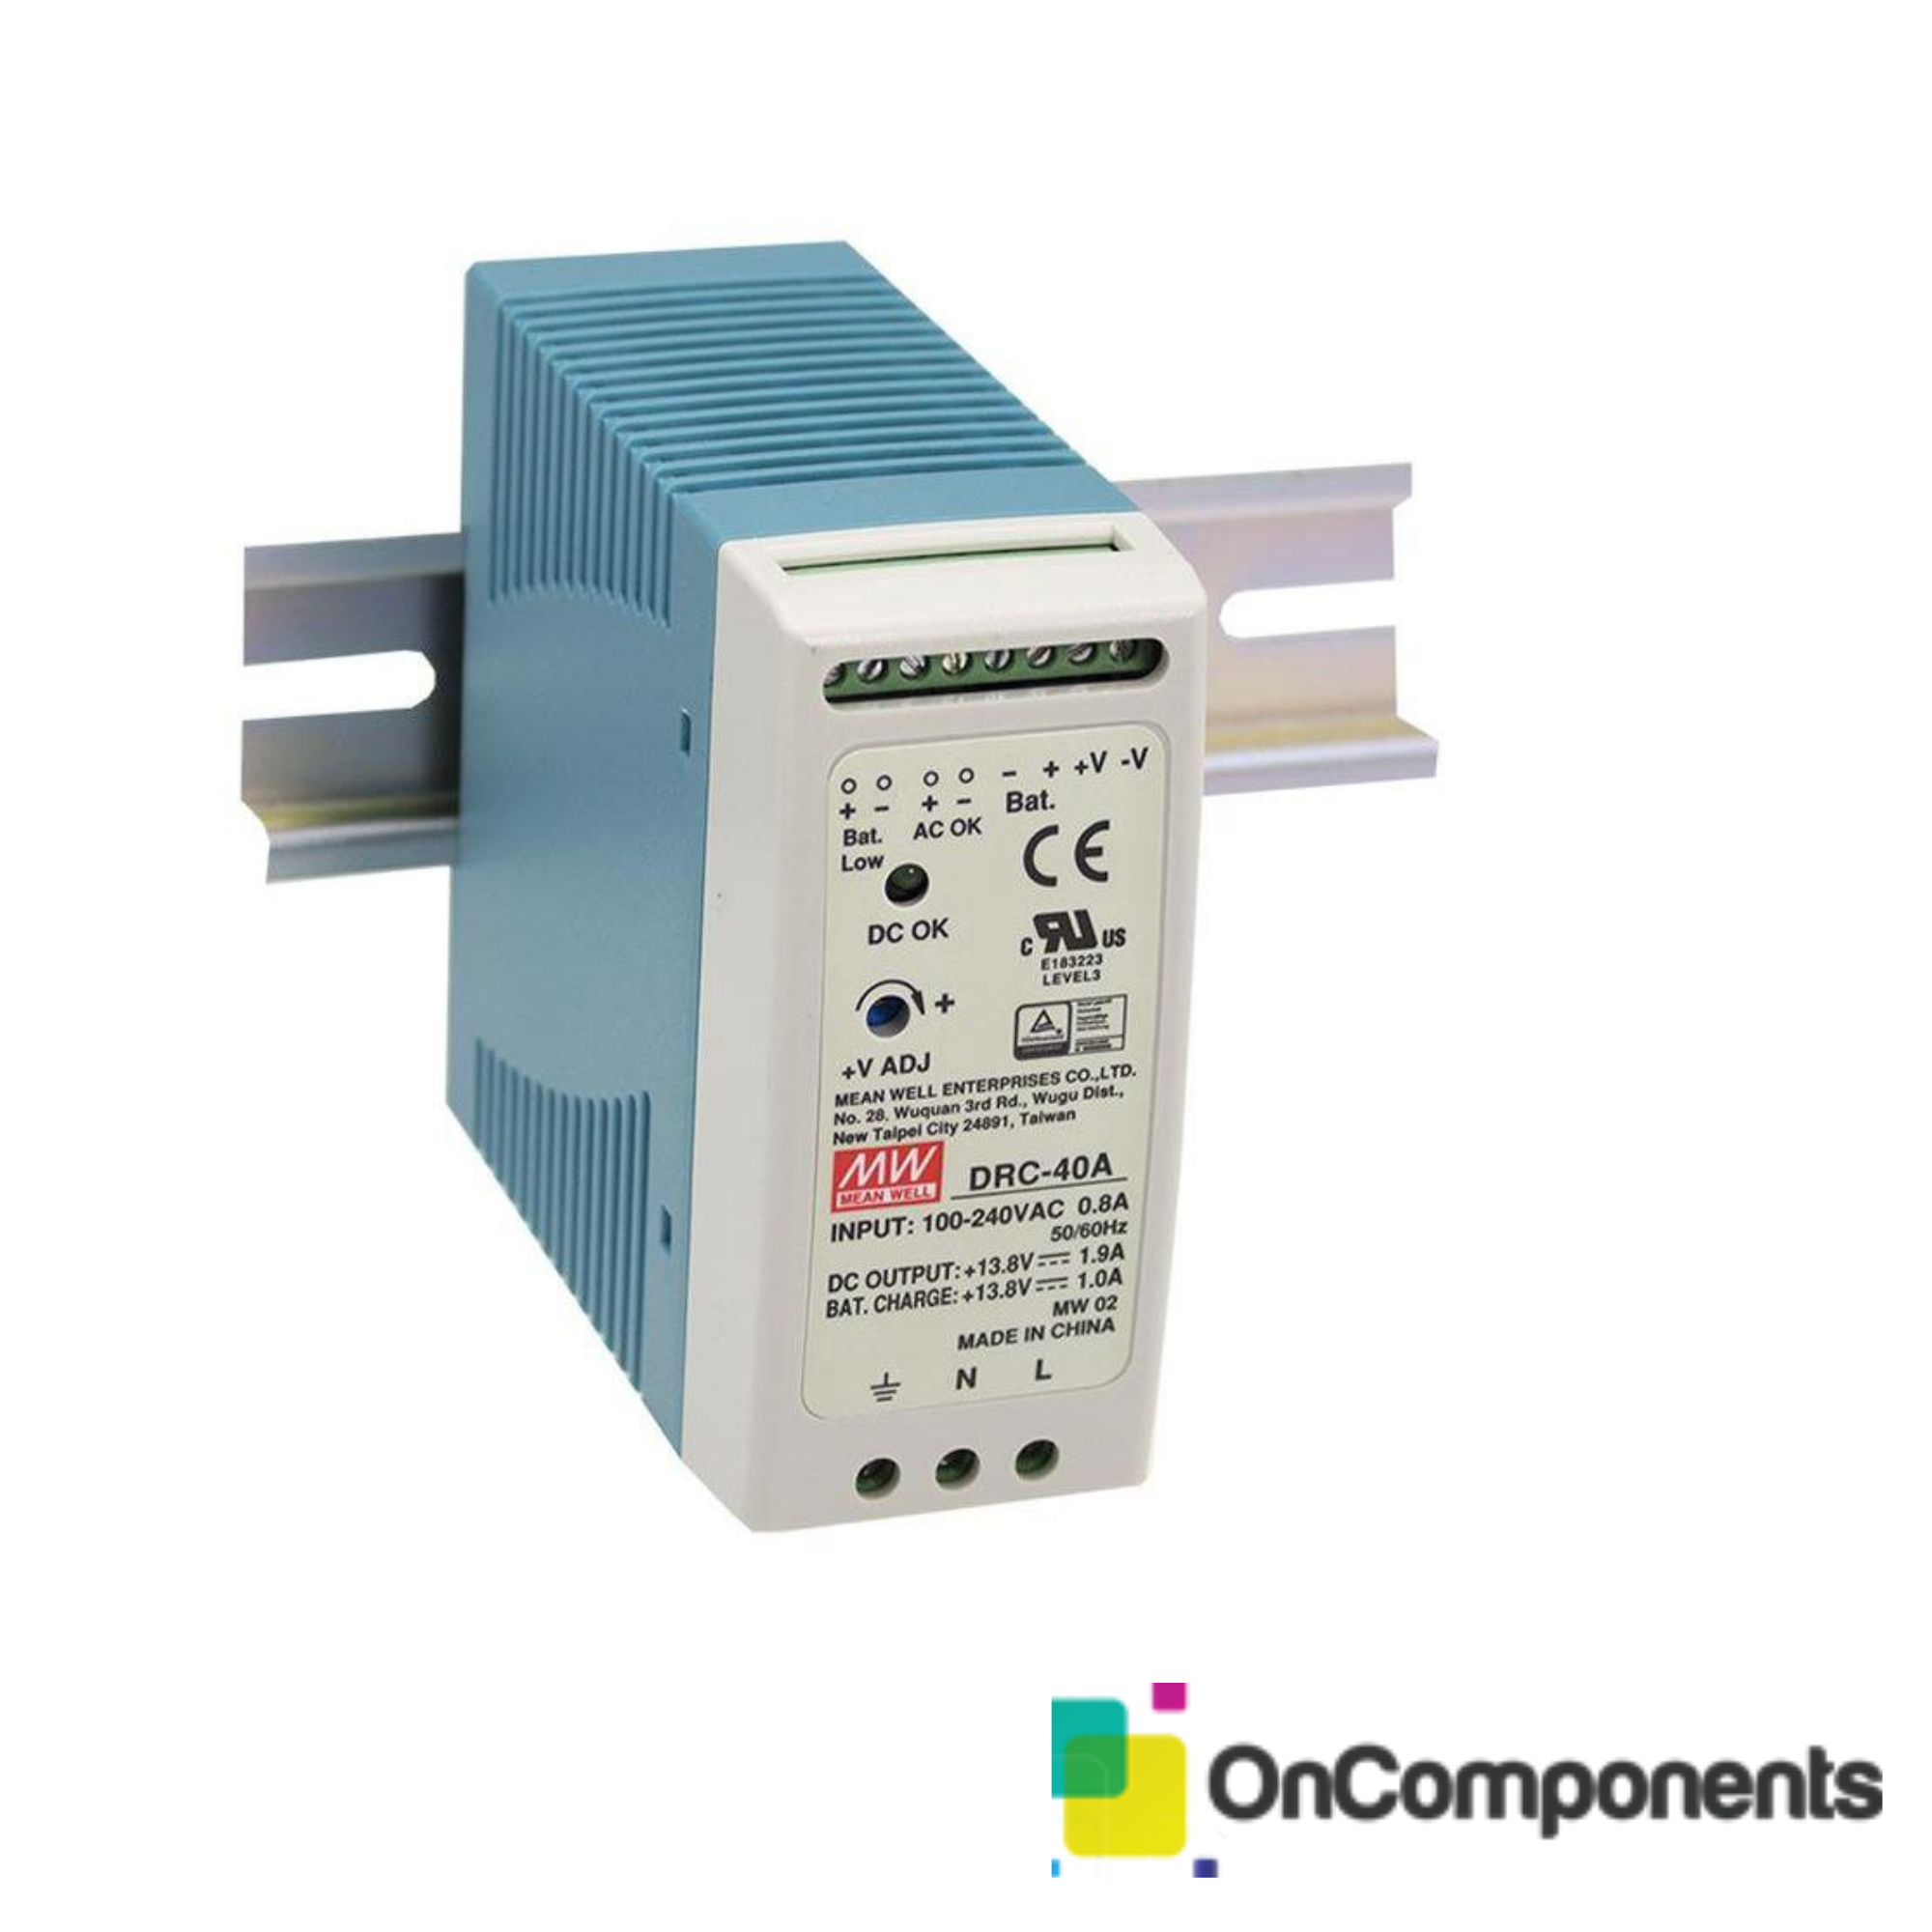 DRC-40A Meanwell Power Supply